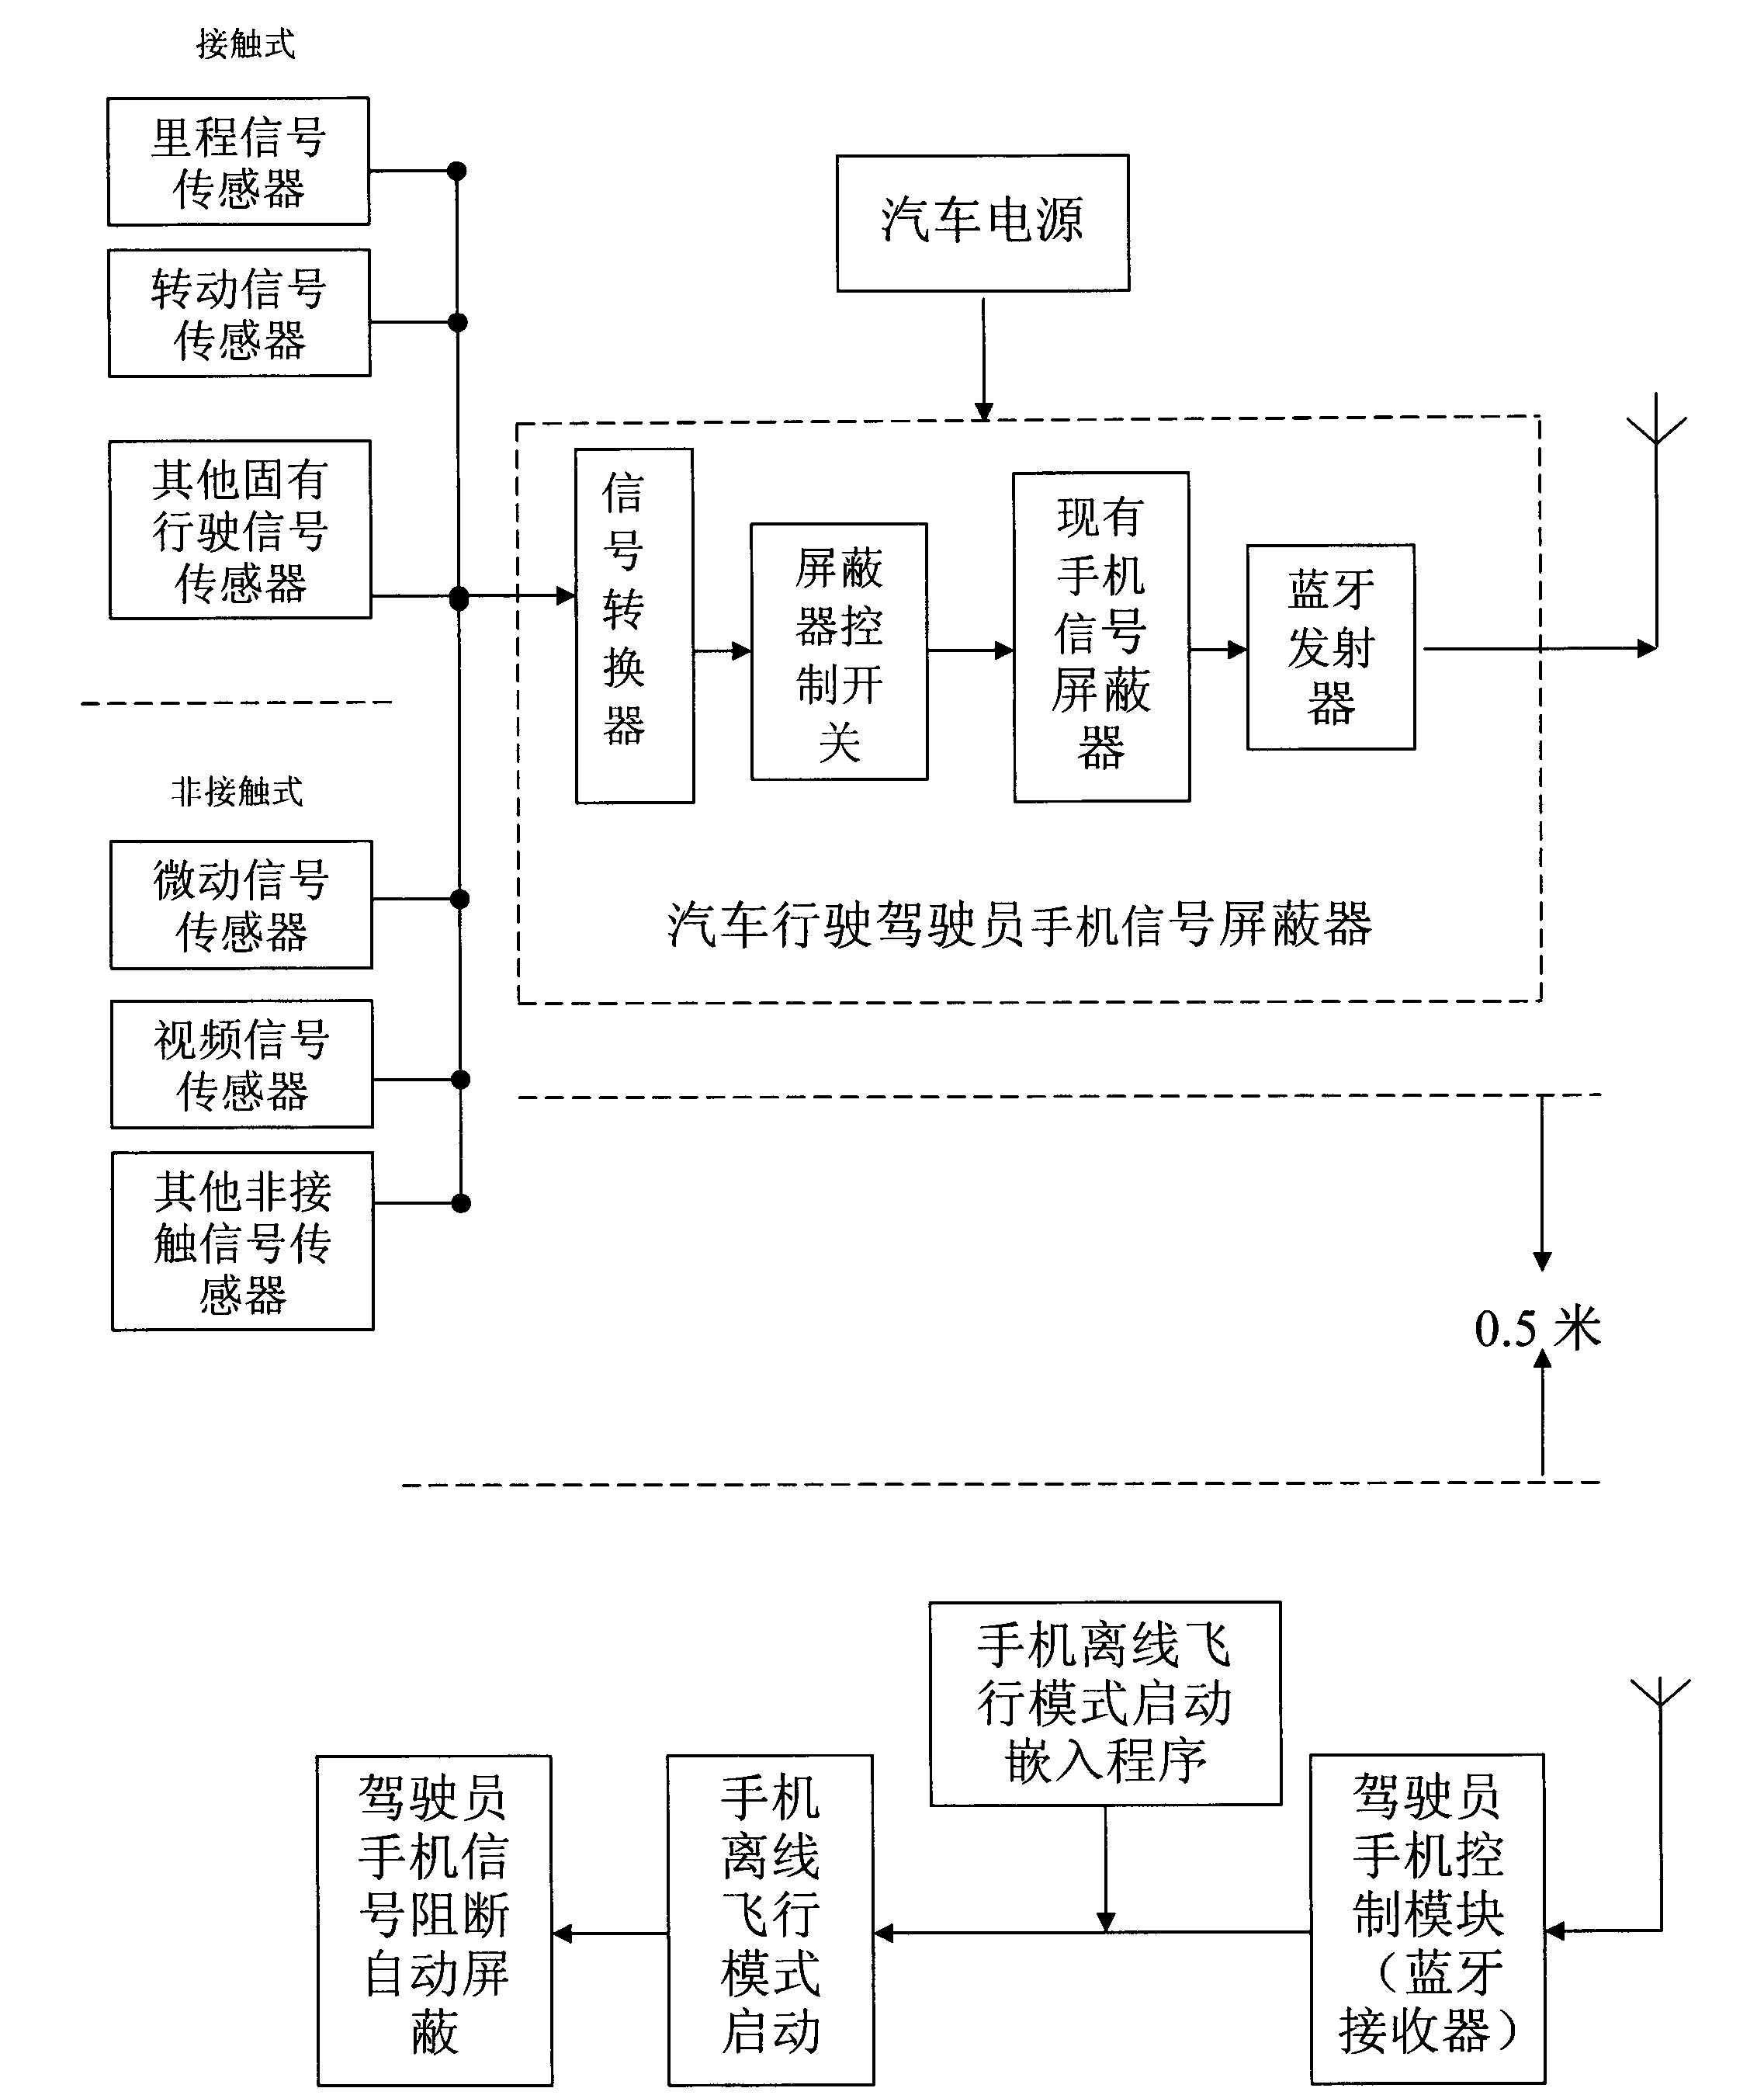 Mobile phone signal shielding device for automobile driver